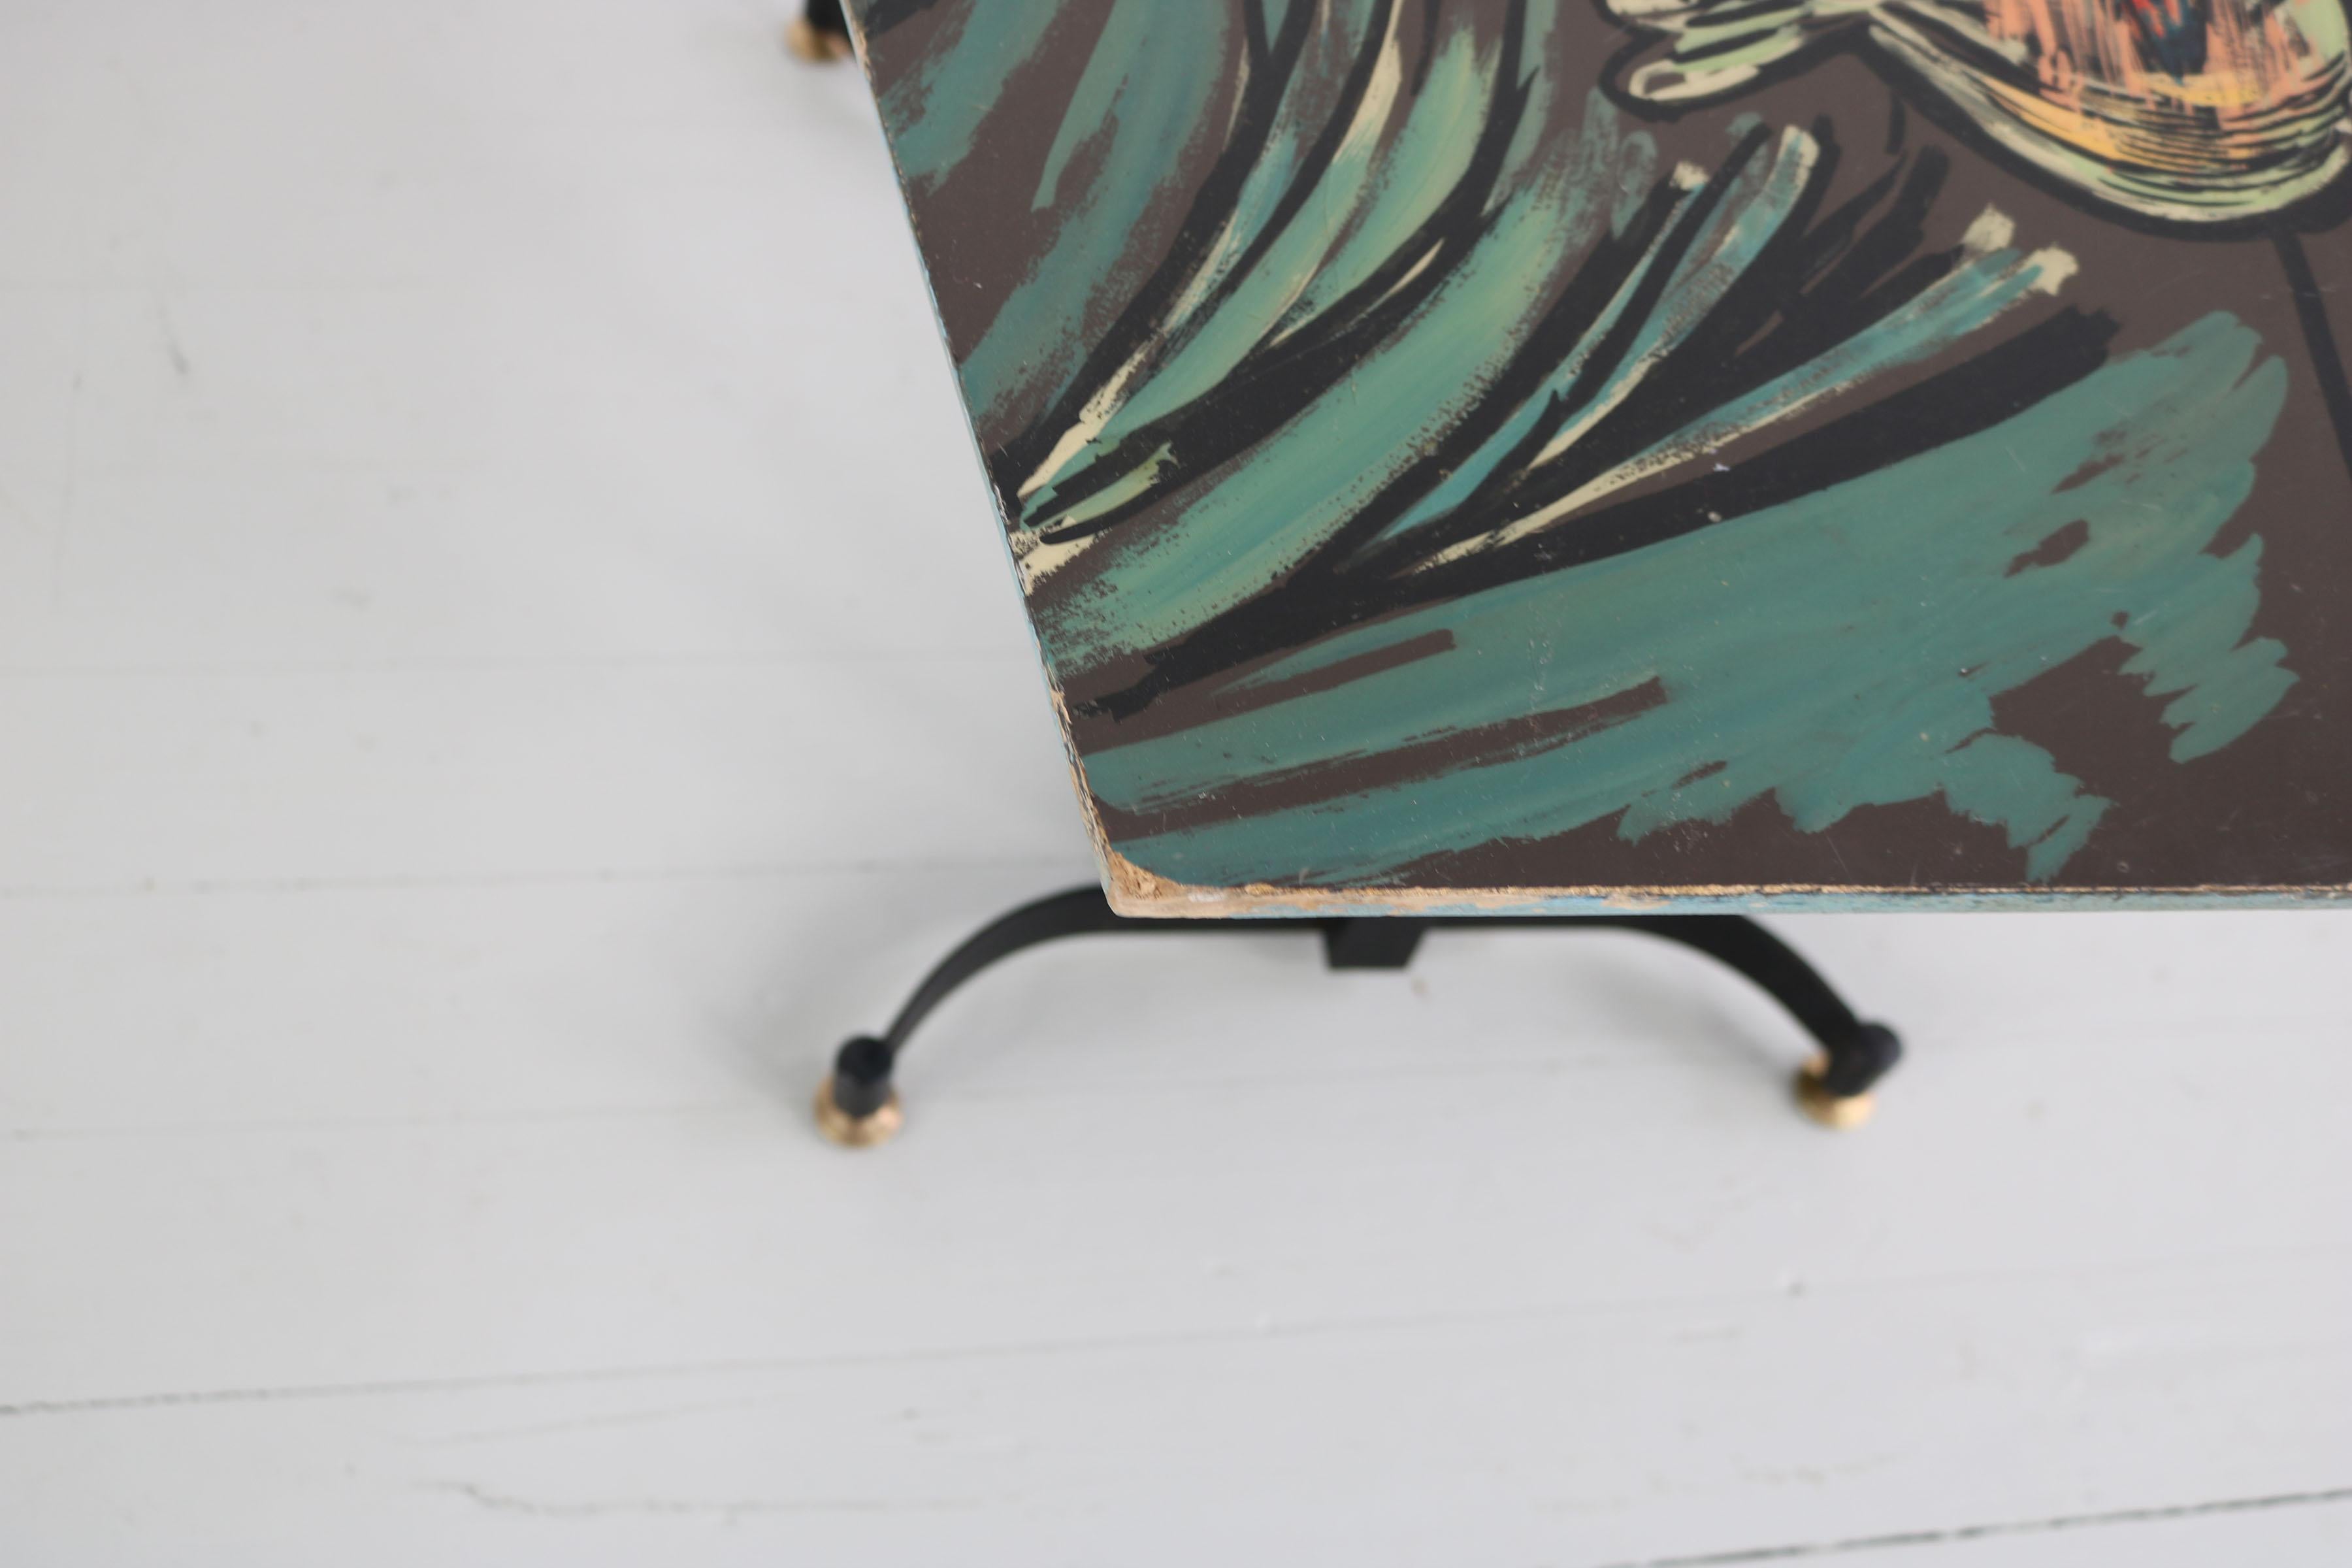 Italian Dark Sofa Table with Colorful Hand Painted Motives on Table Top, 1950s For Sale 6